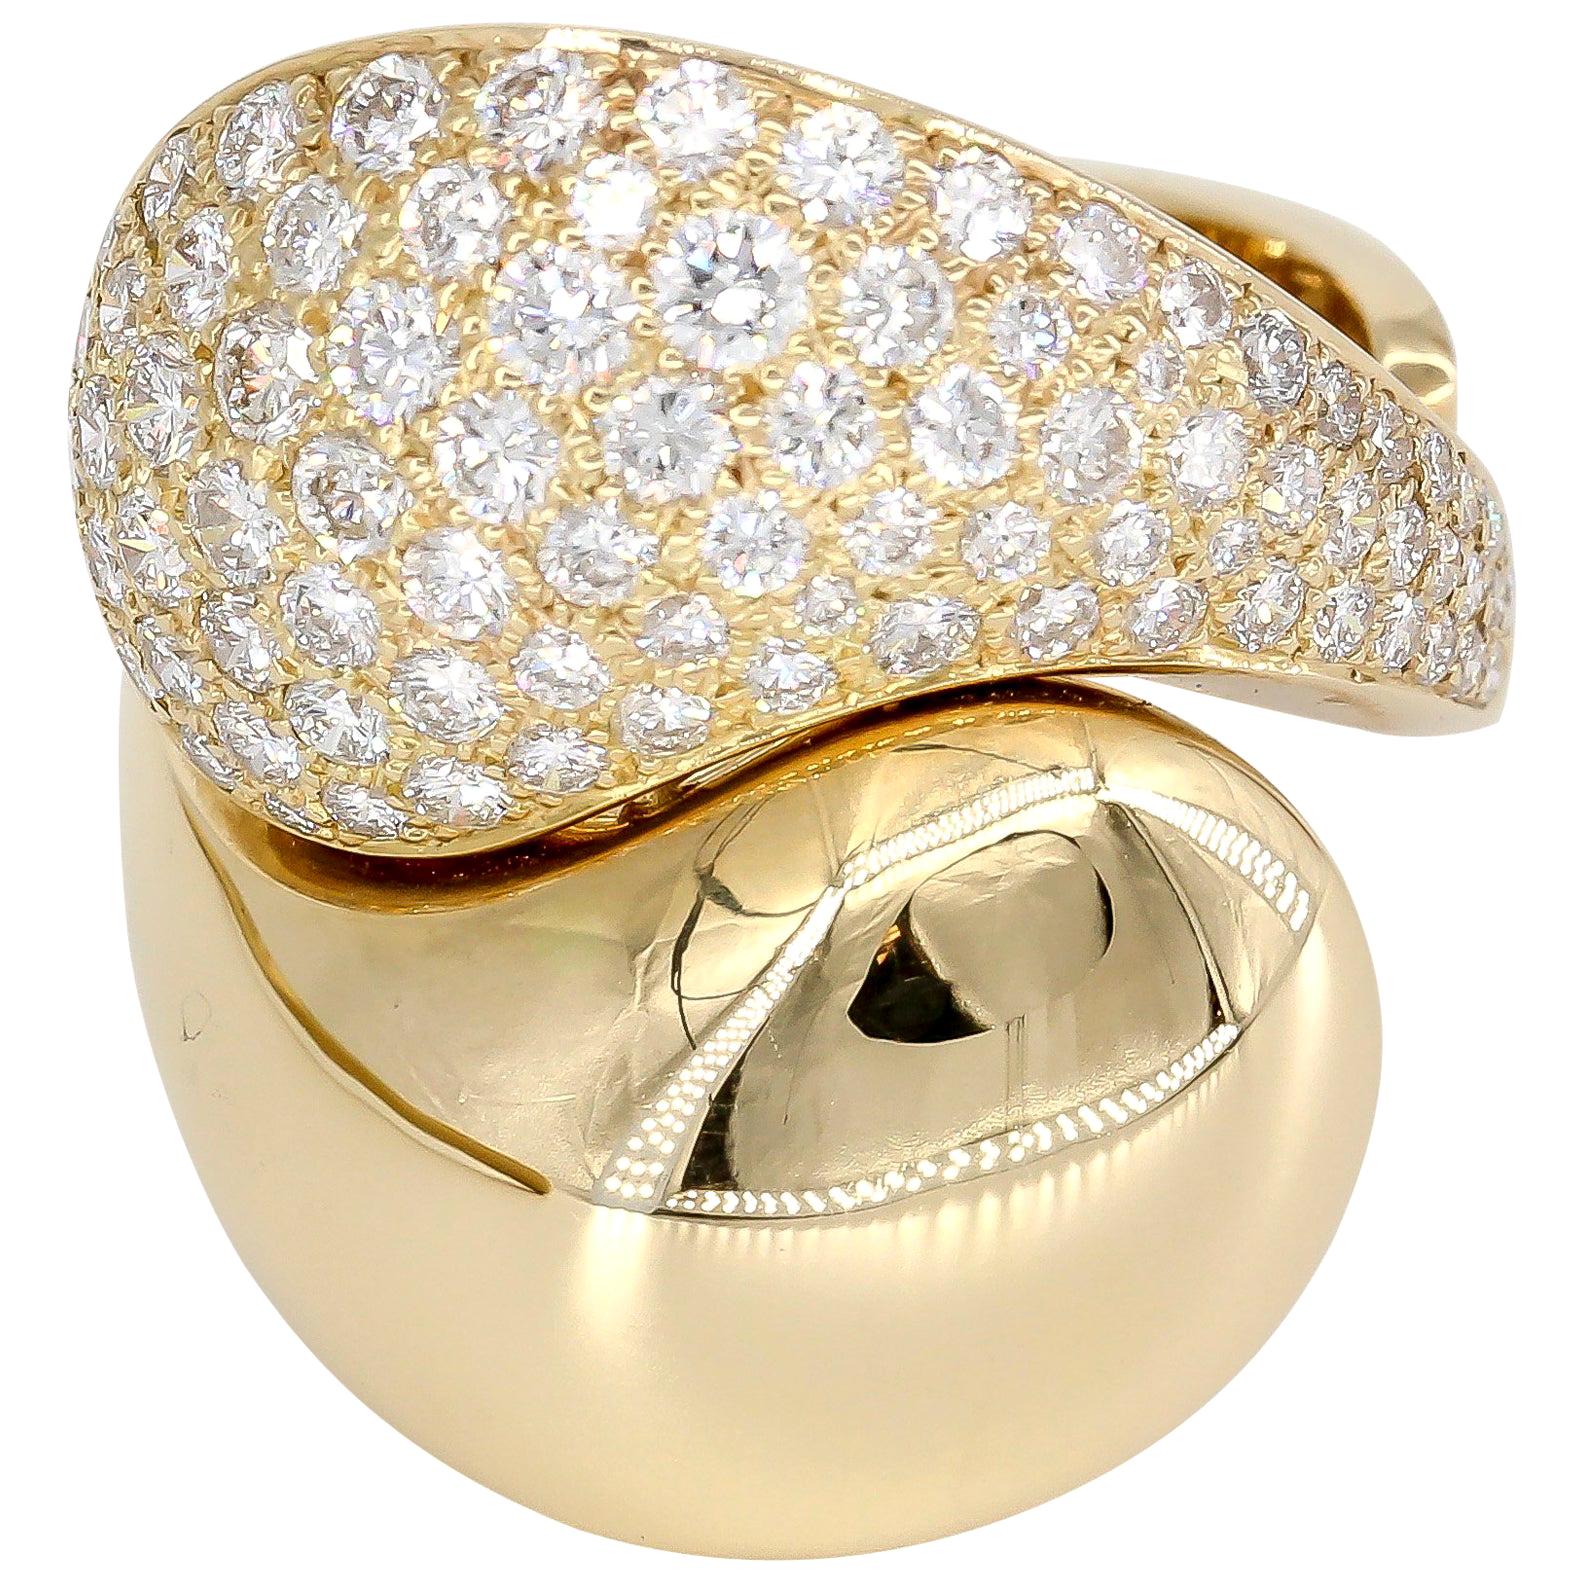 Discover the harmonious union of elegance and symbolism with the Cartier Diamond 18 Karat Gold Yin Yang Ring. This captivating piece of jewelry not only embodies the exceptional craftsmanship Cartier is renowned for but also conveys a profound